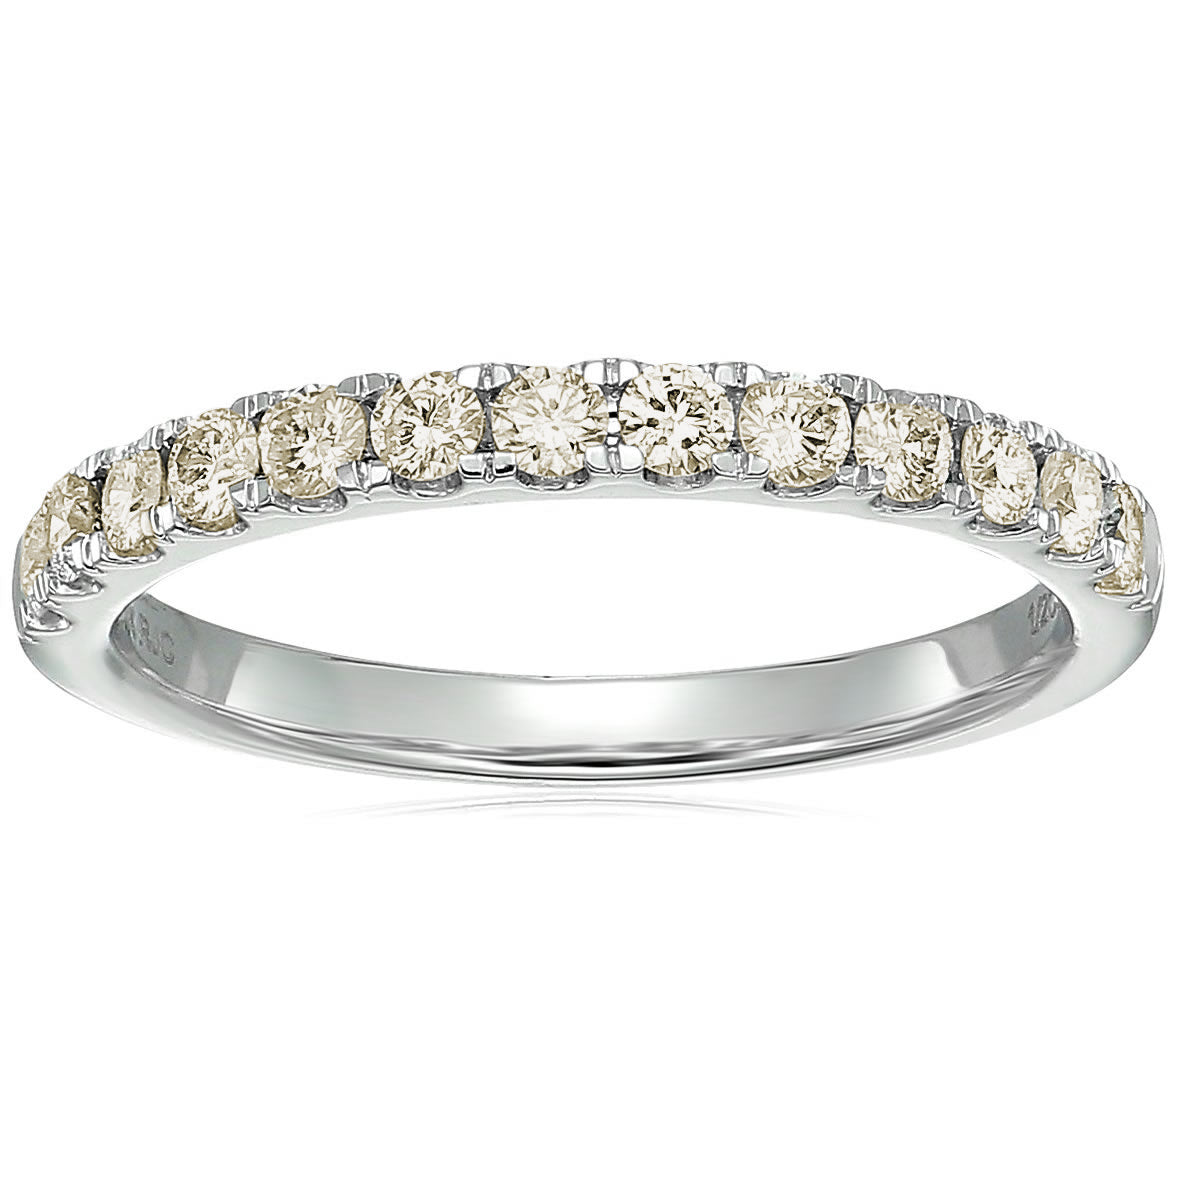 Armenta Old World Champagne Diamond Stackable Eternity Ring | Neiman Marcus